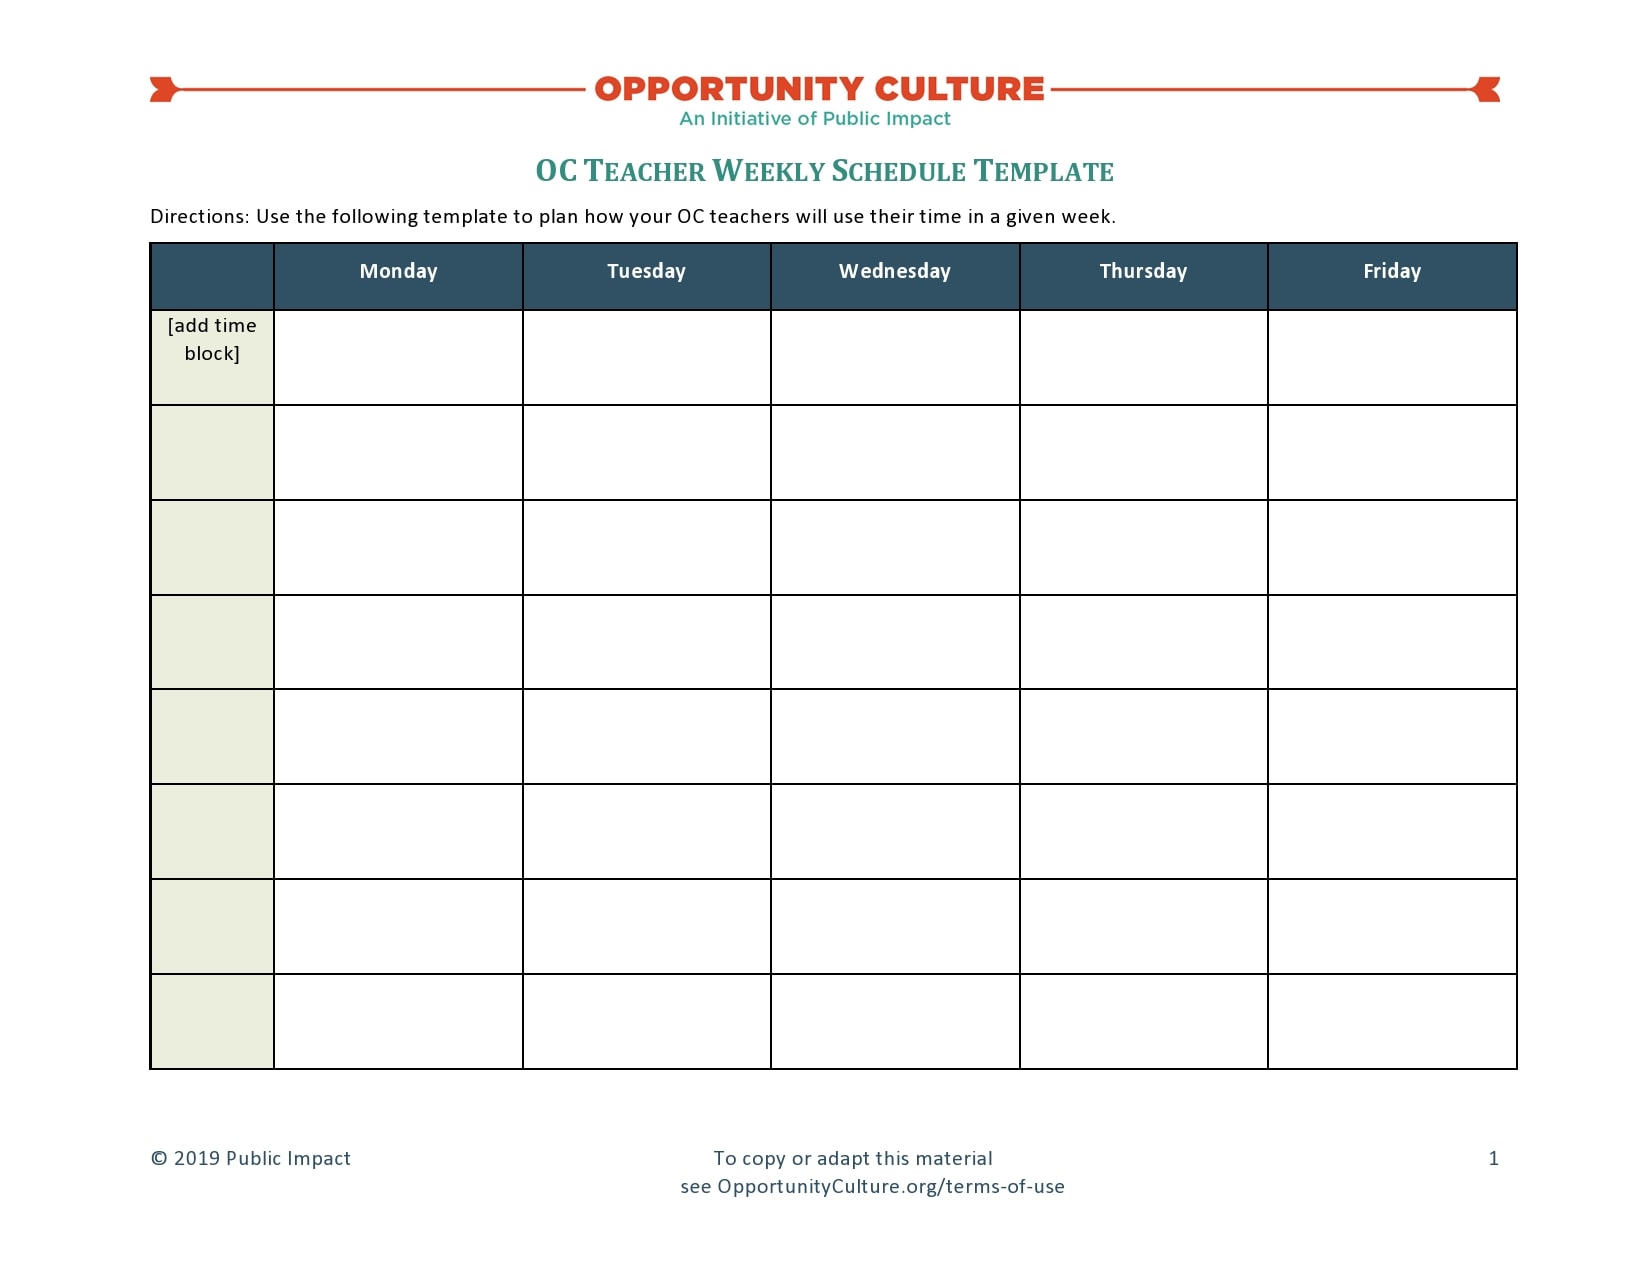 7 day weekly work schedule template